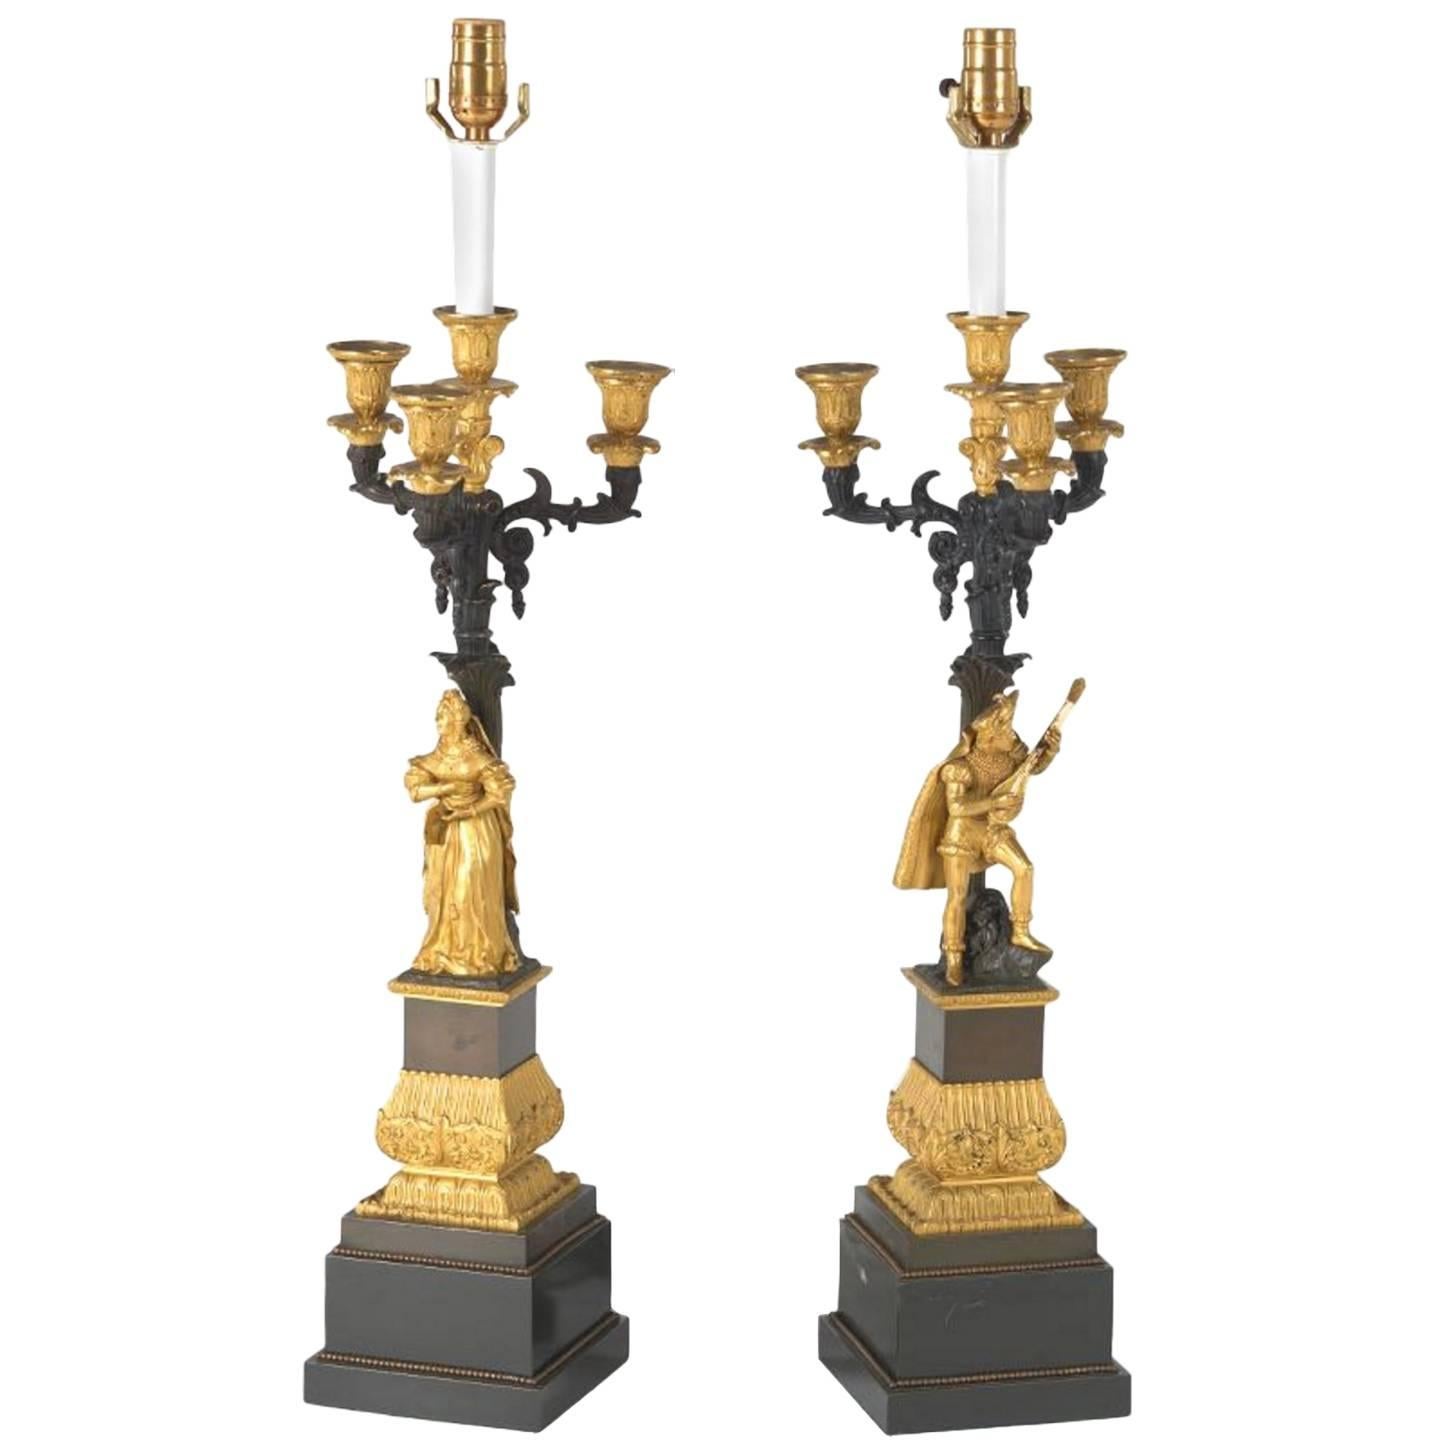 Pair of French Ormolu and Patinated Bronze Four-Light Candelabra Lamps